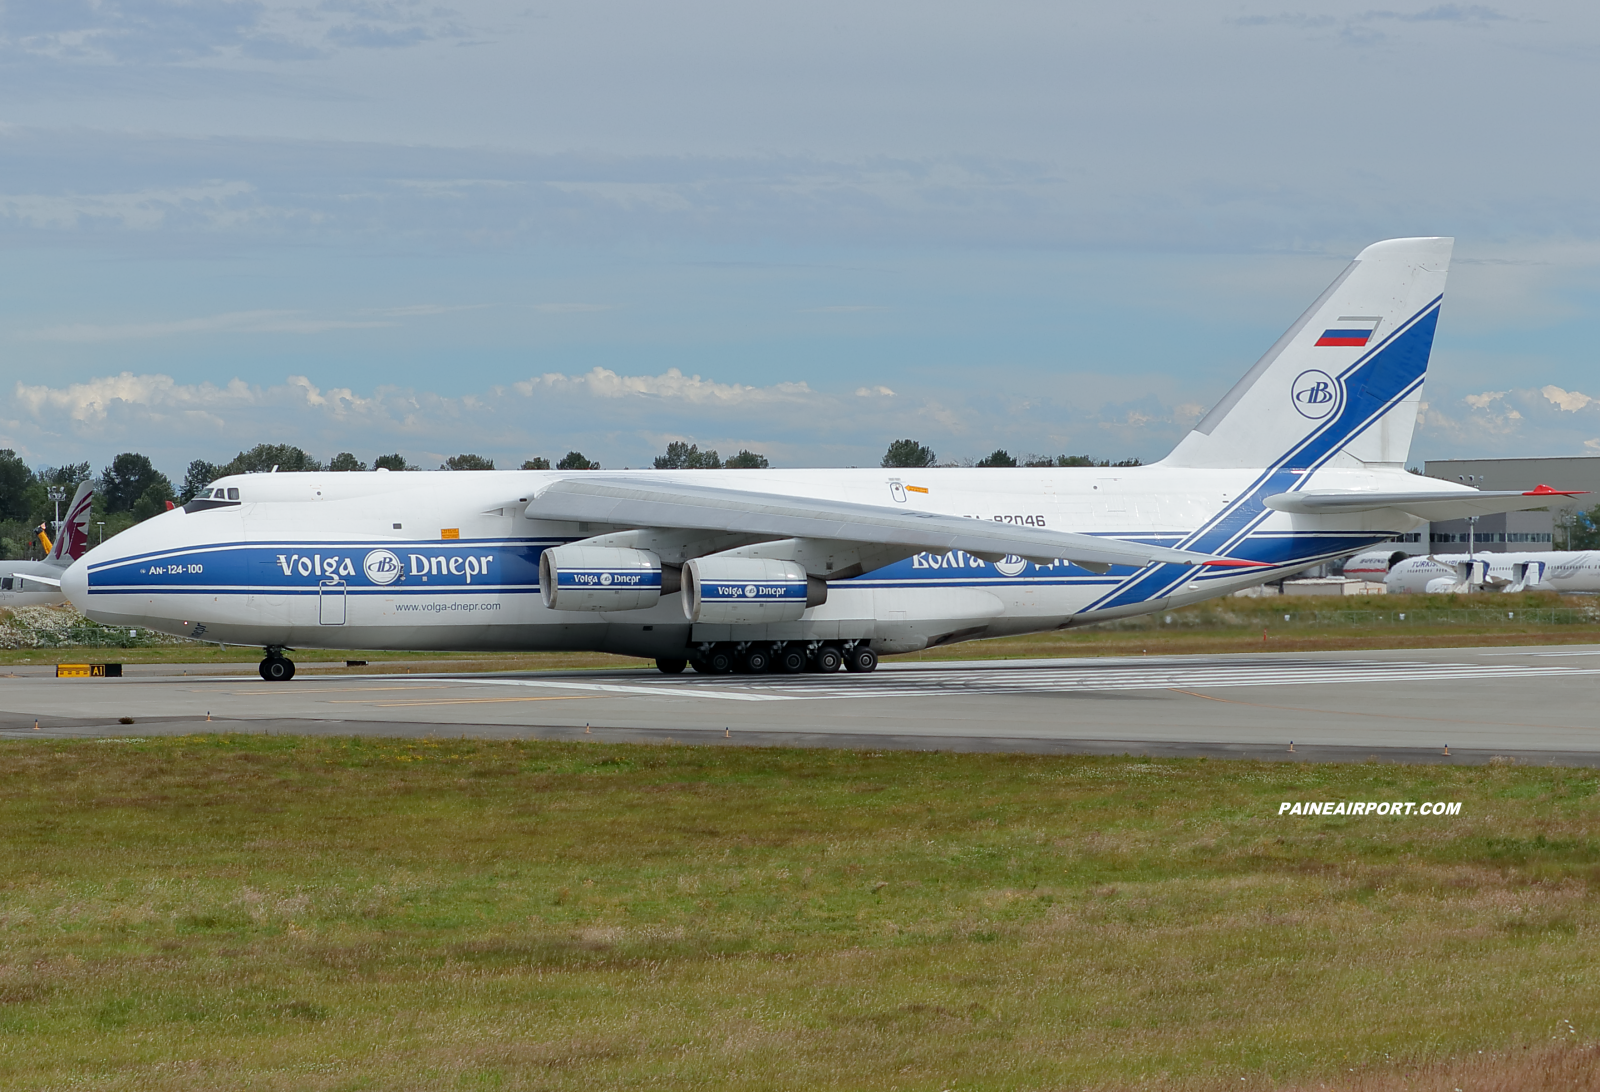 An-124 RA-82046 at KPAE Paine Field